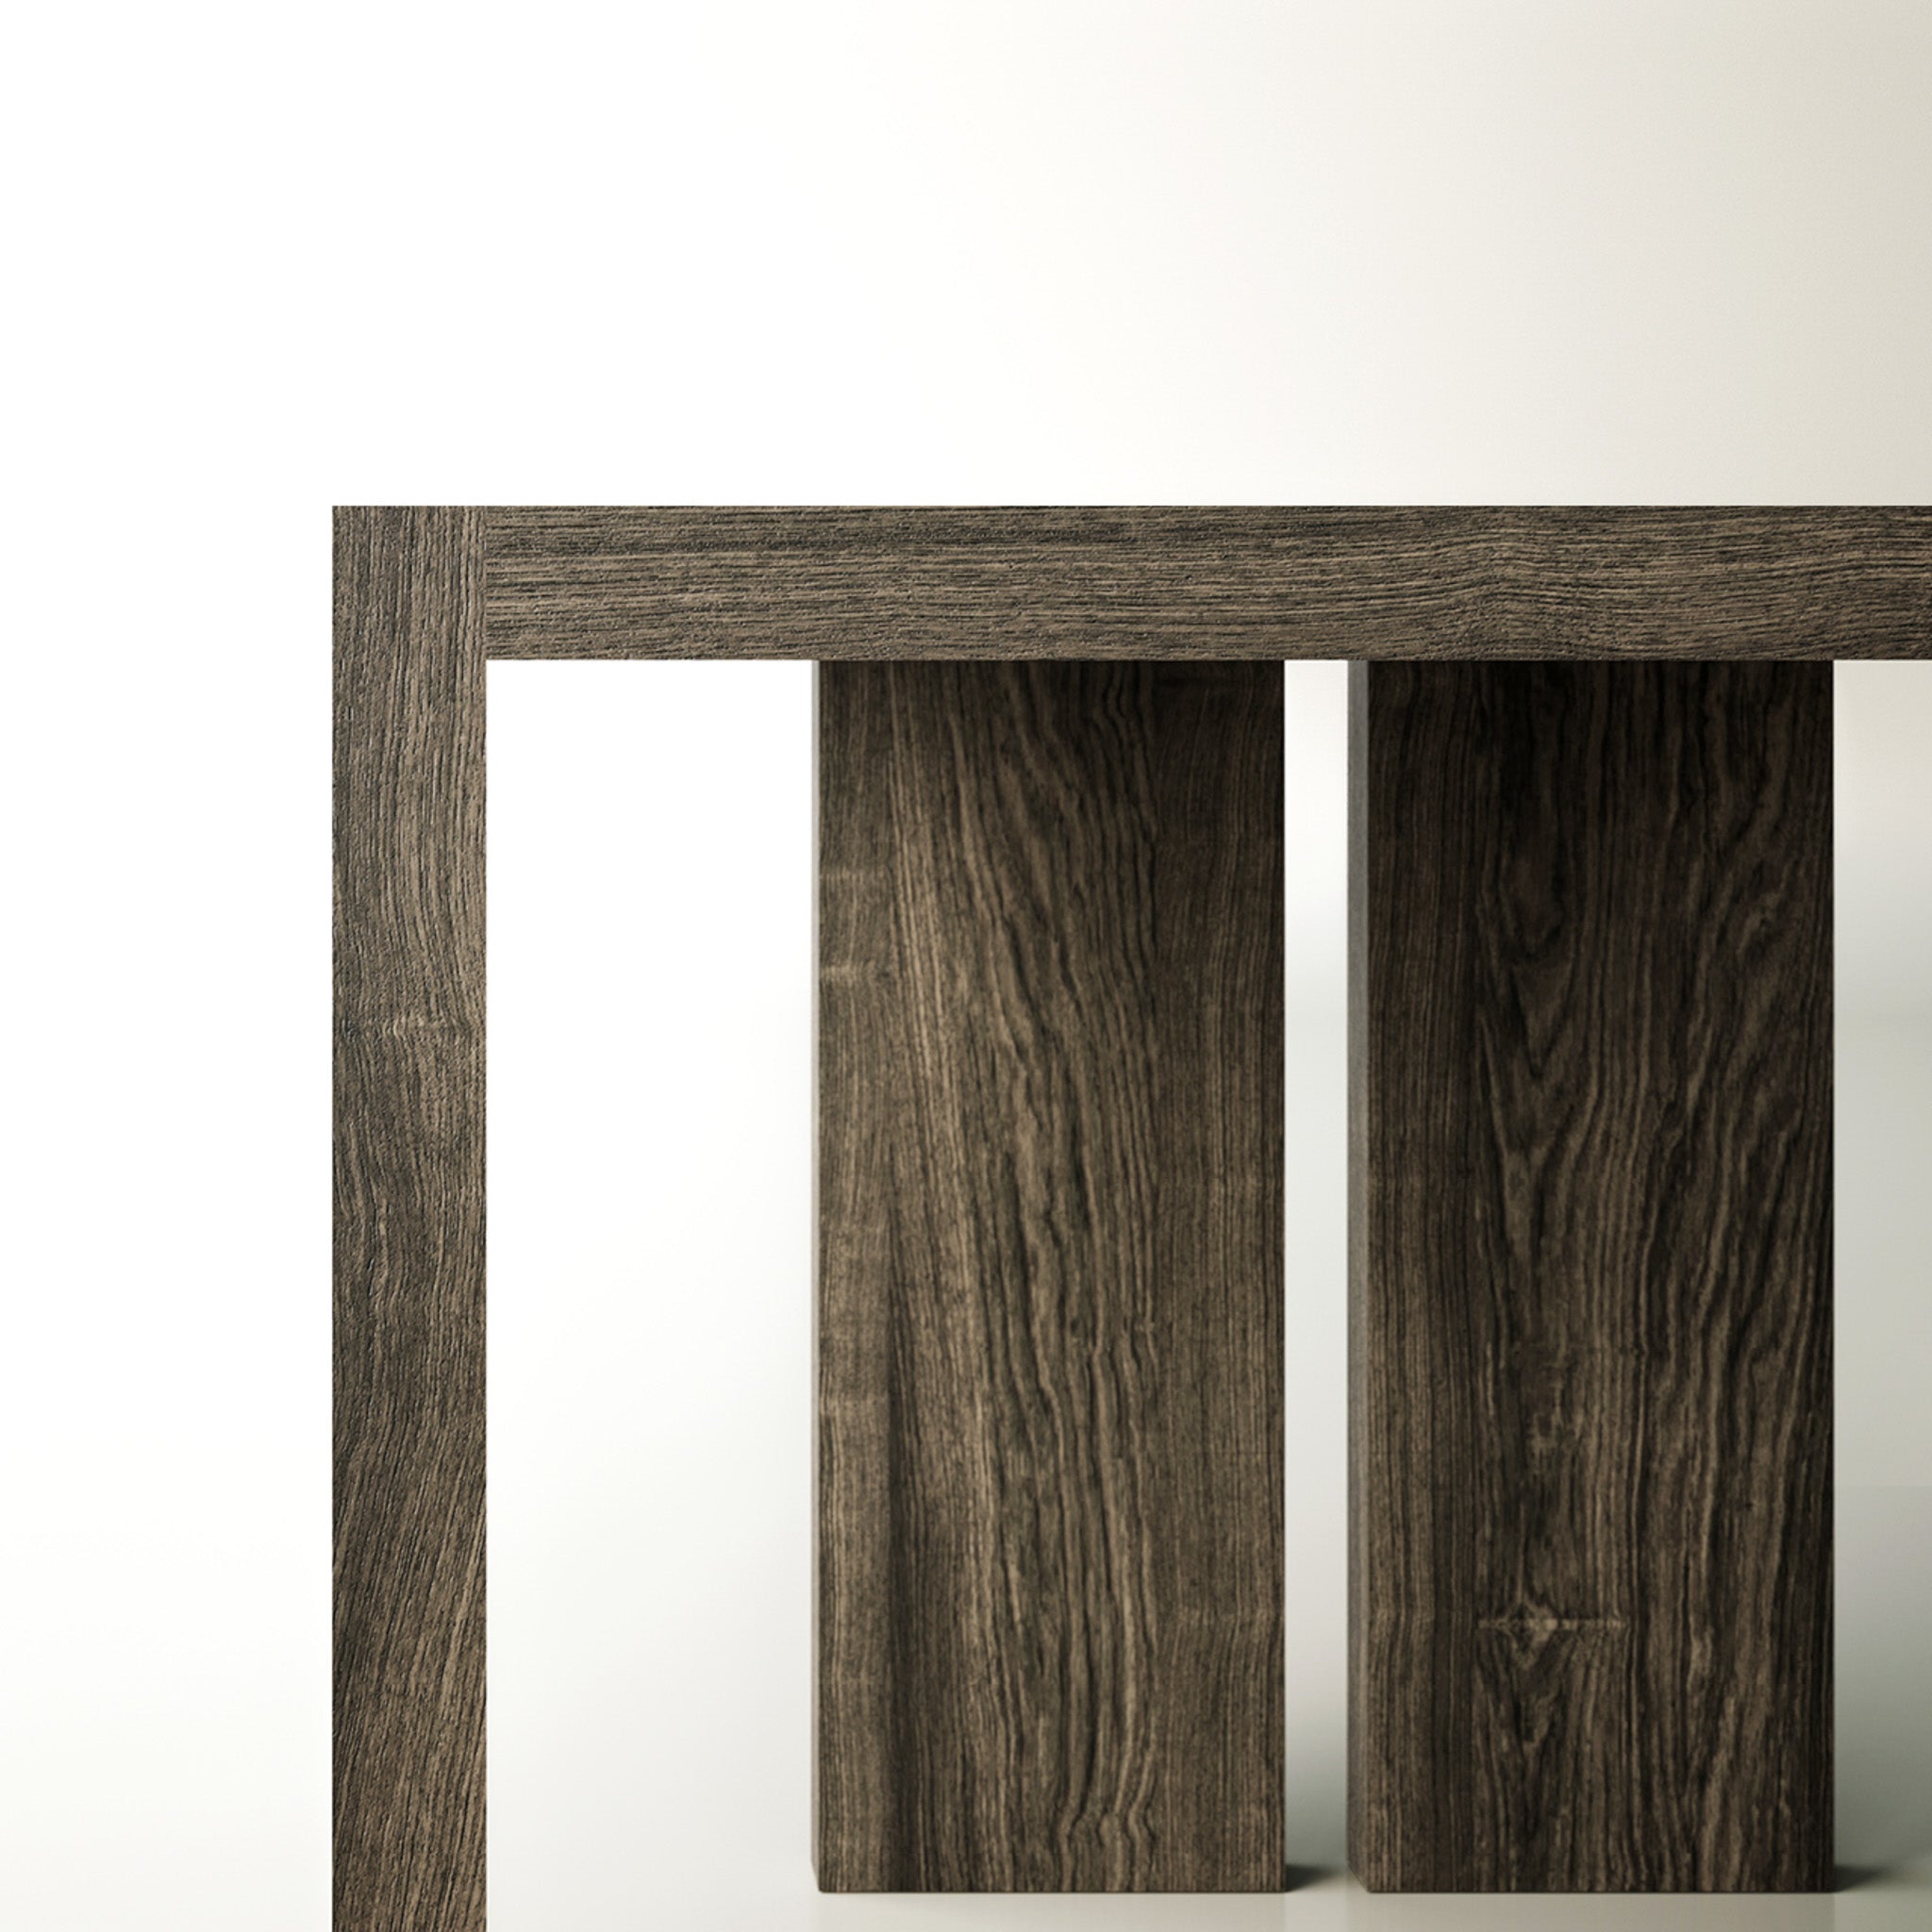 LS03 Dining Table